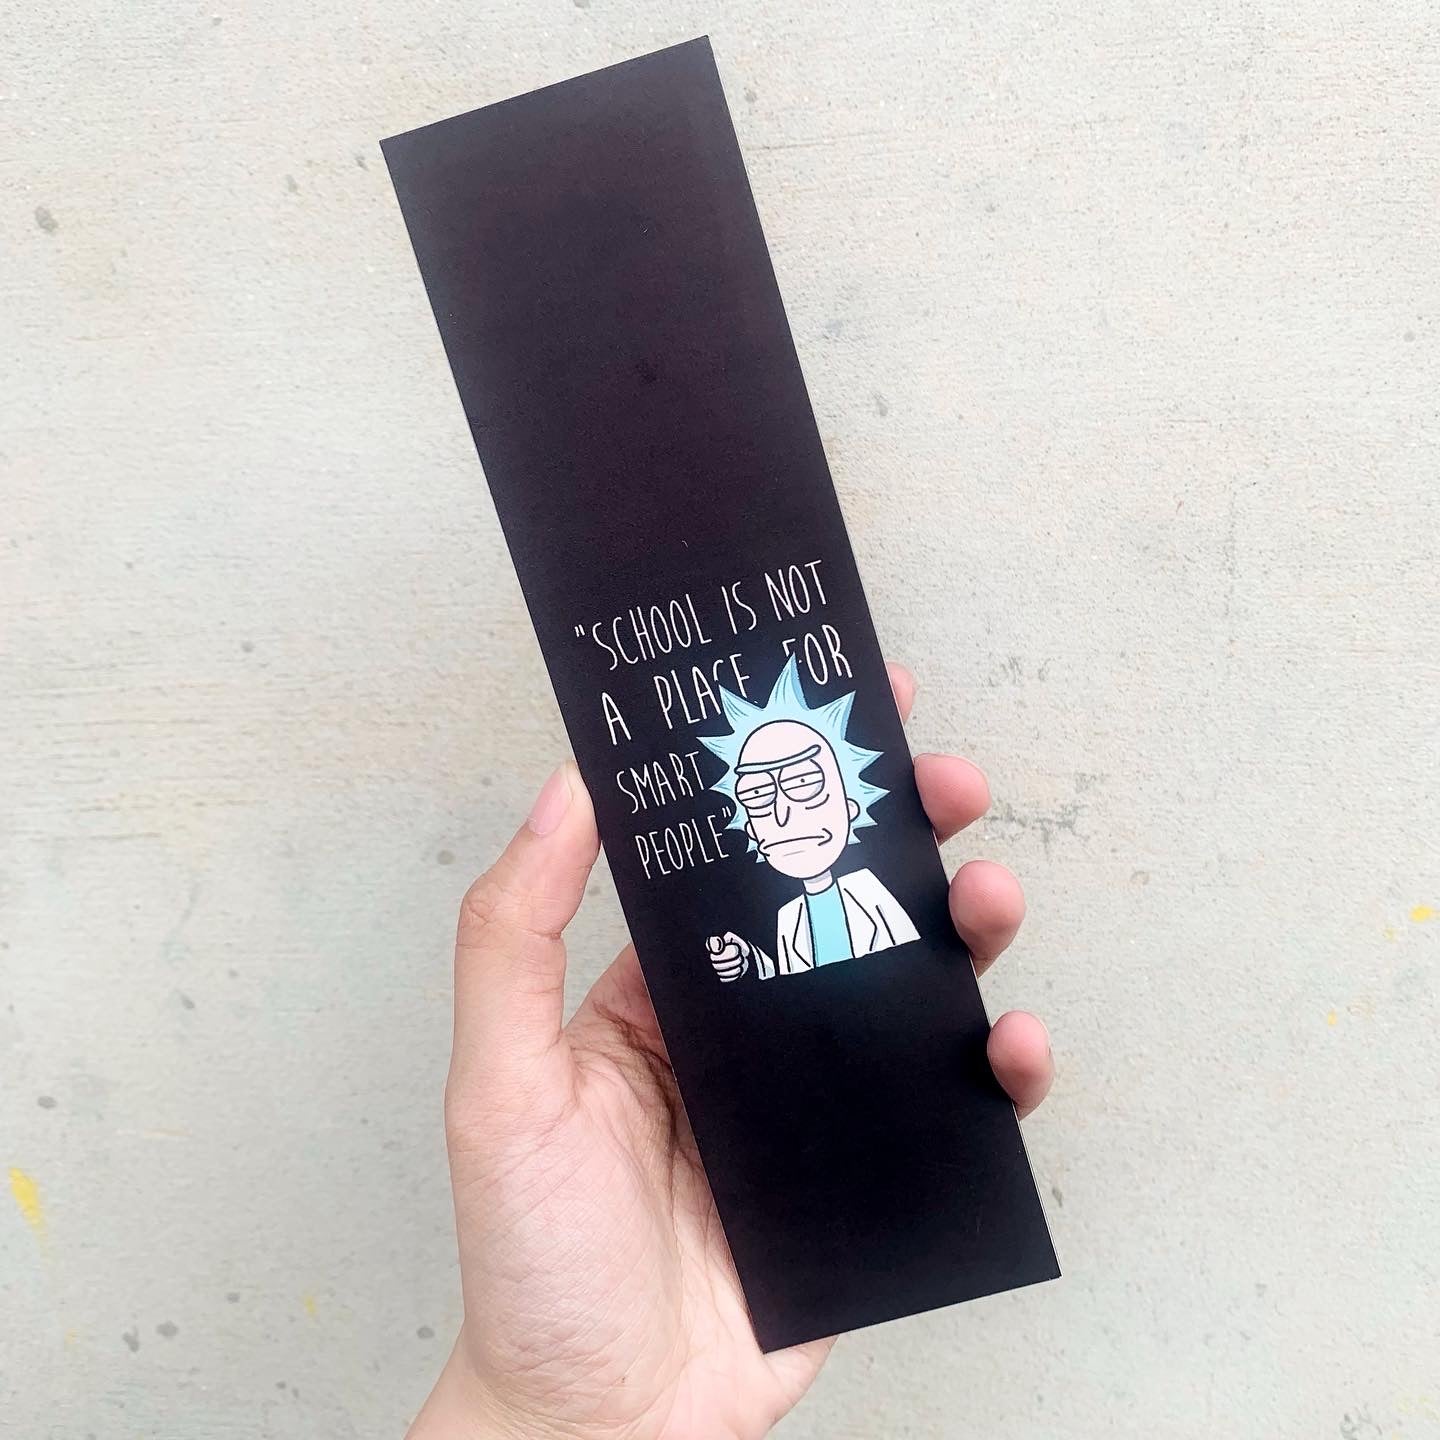 Rick and morty bookmark set of 5